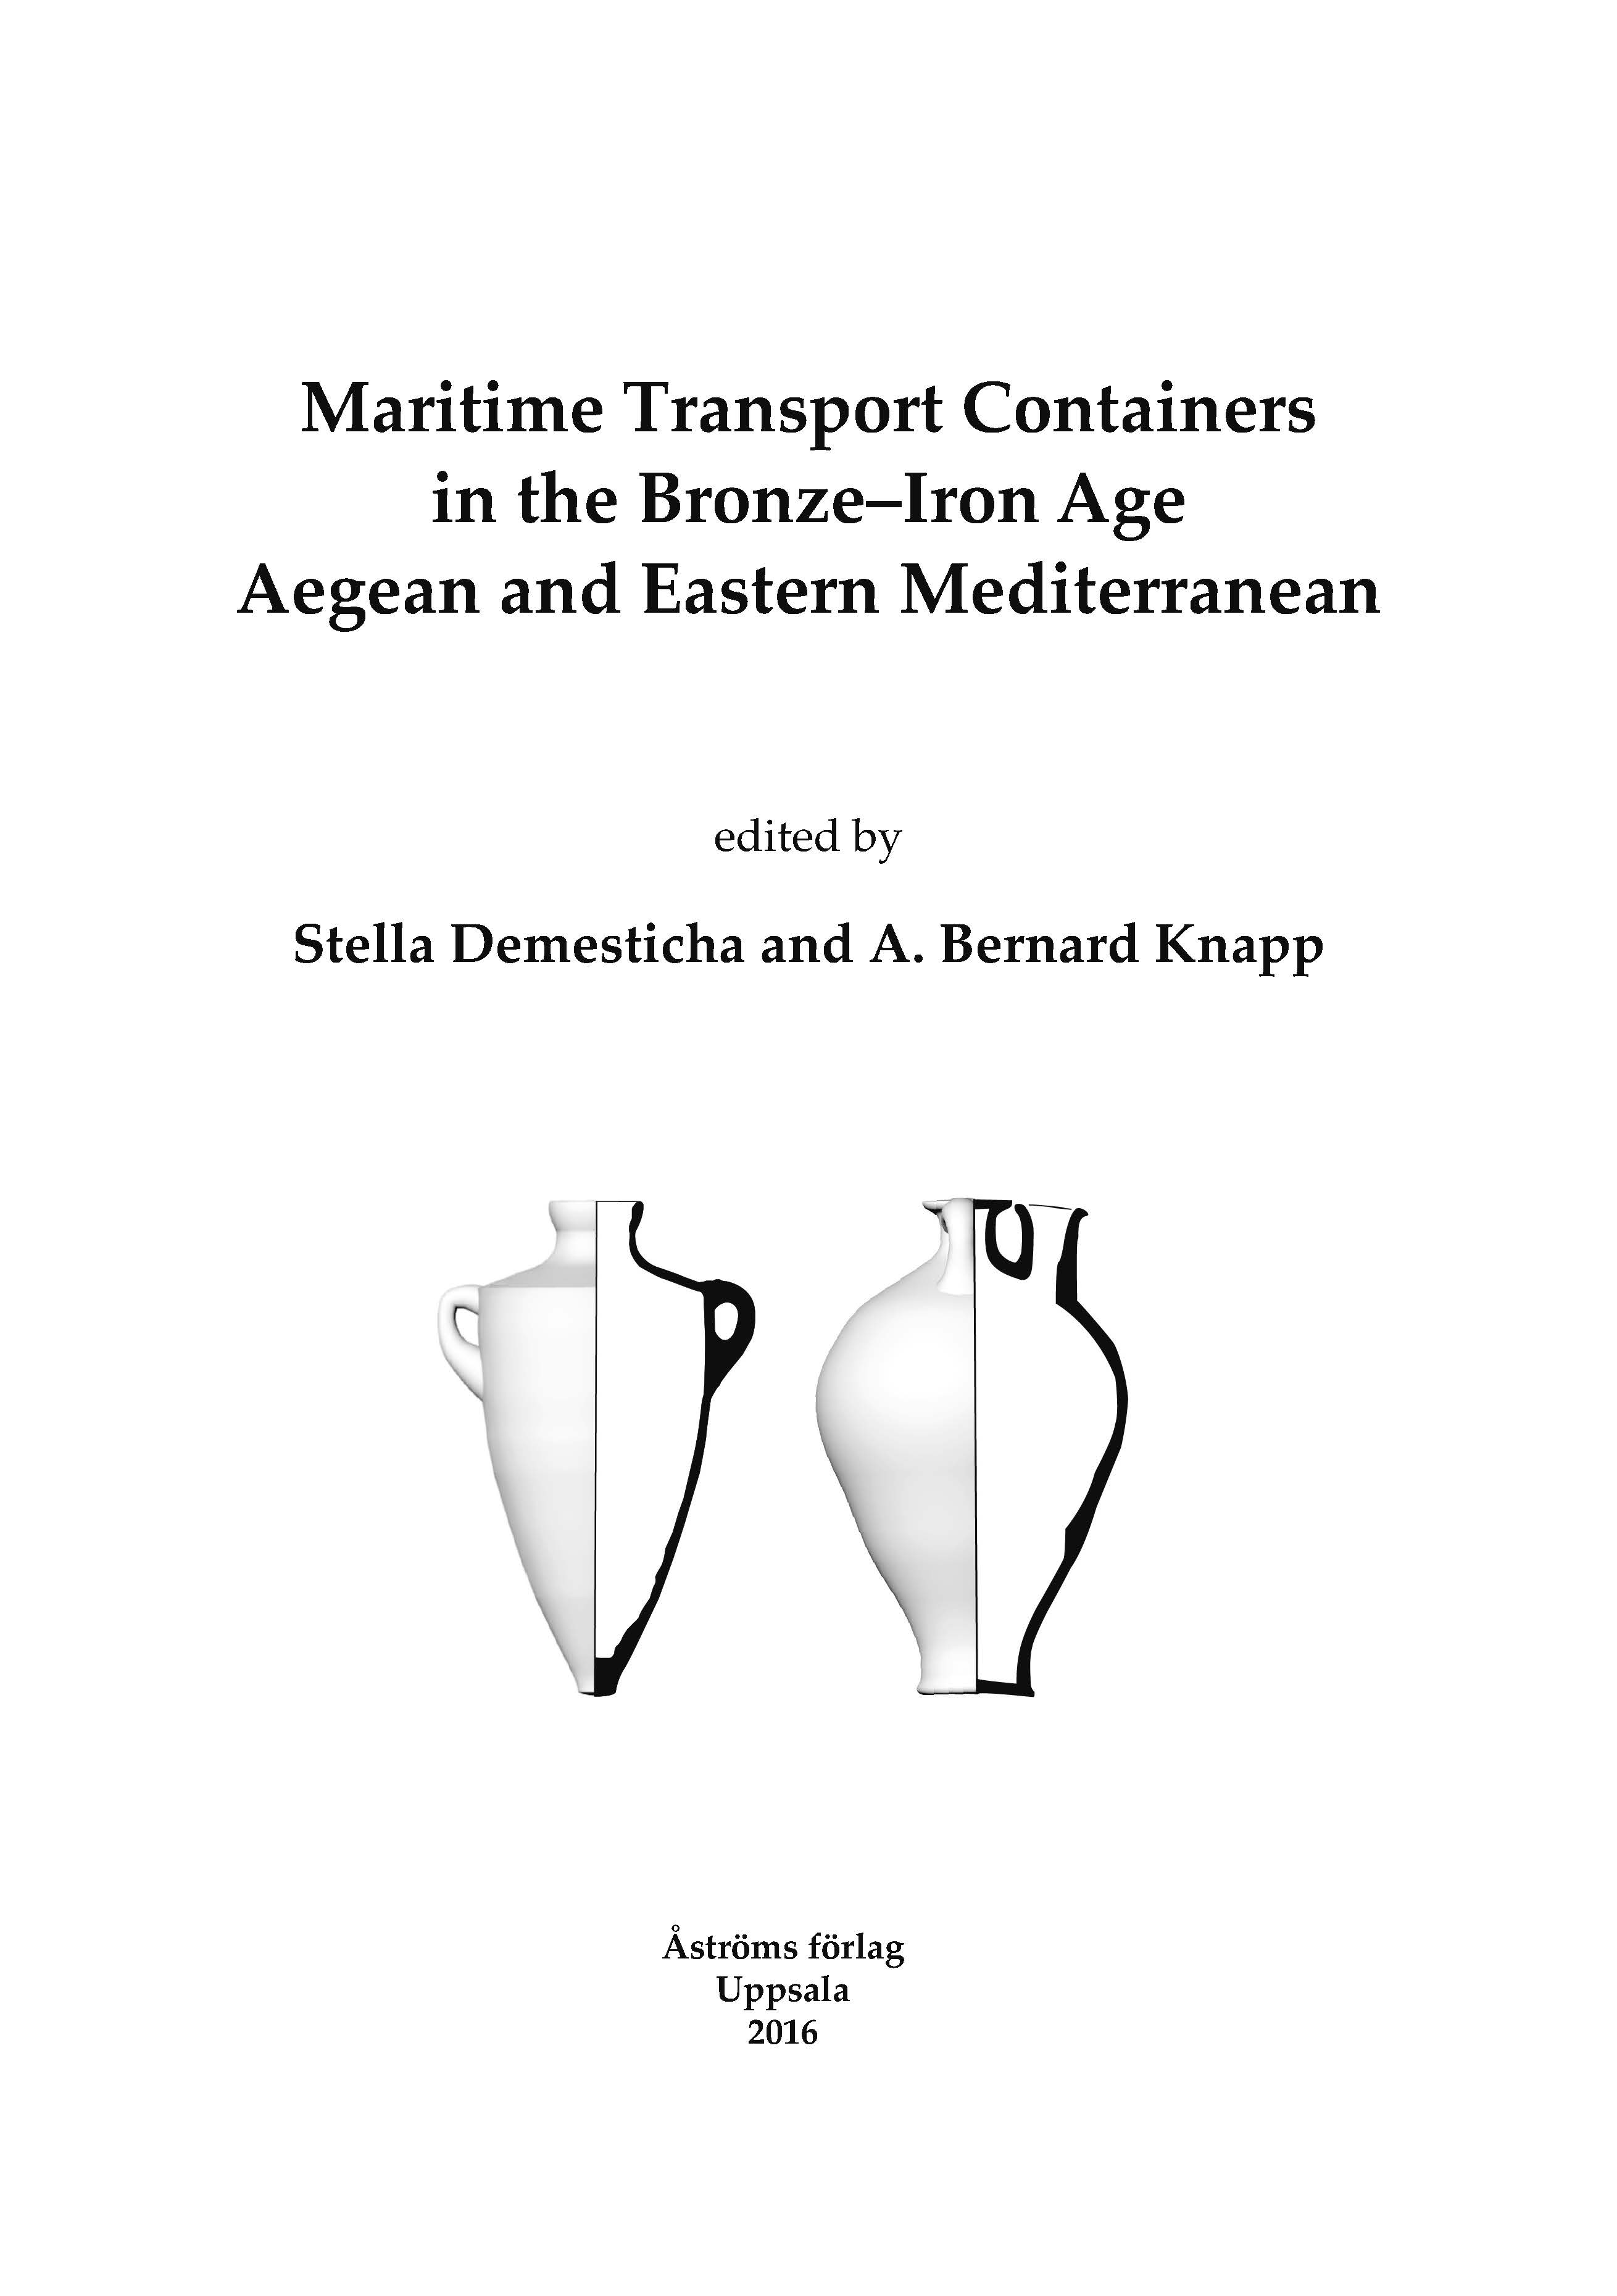 [Maritime Transport Containers in the Bronze–Iron Age Aegean and Eastern Mediterranean.]